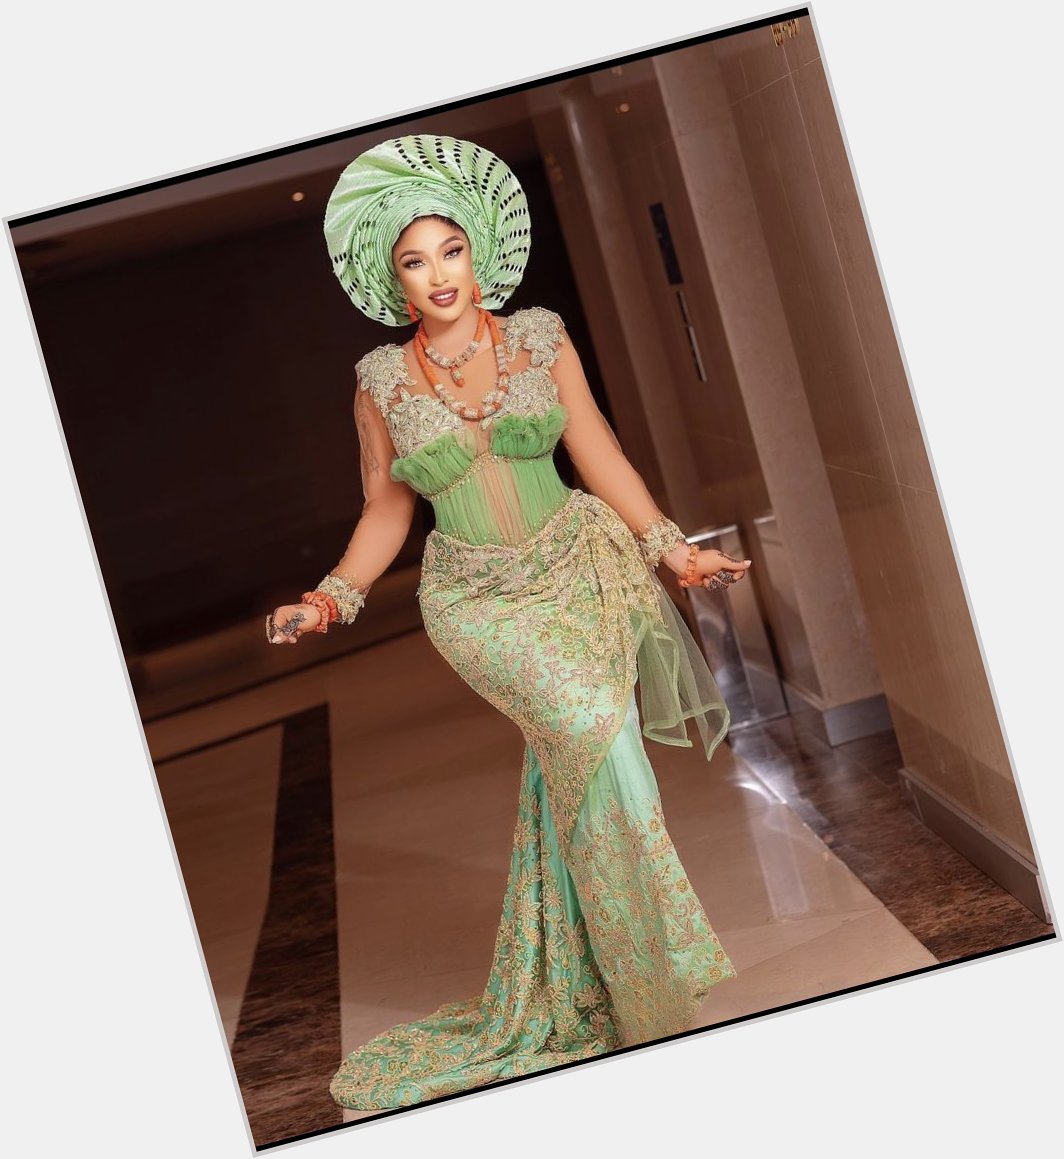 Happy birthday KING TONTO DIKEH  Stay blessed Always . Super woman 